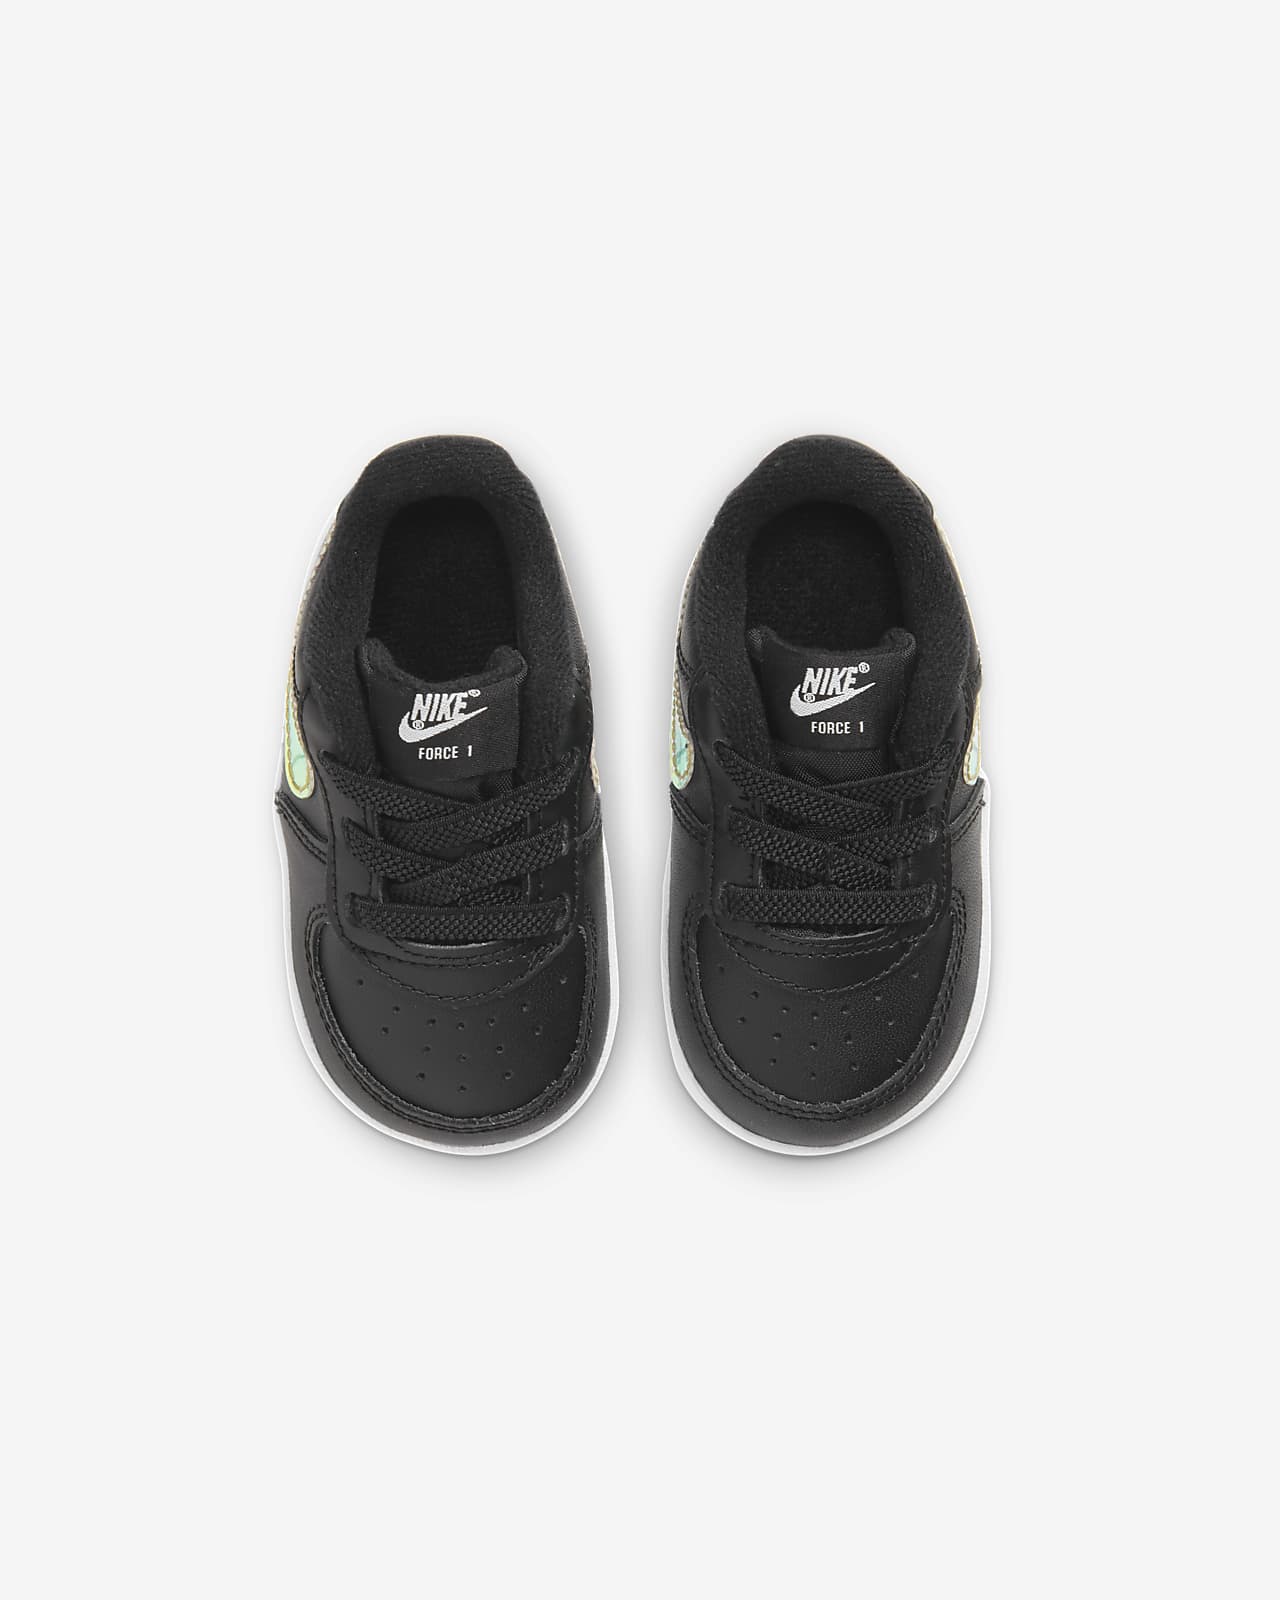 nike baby bootie